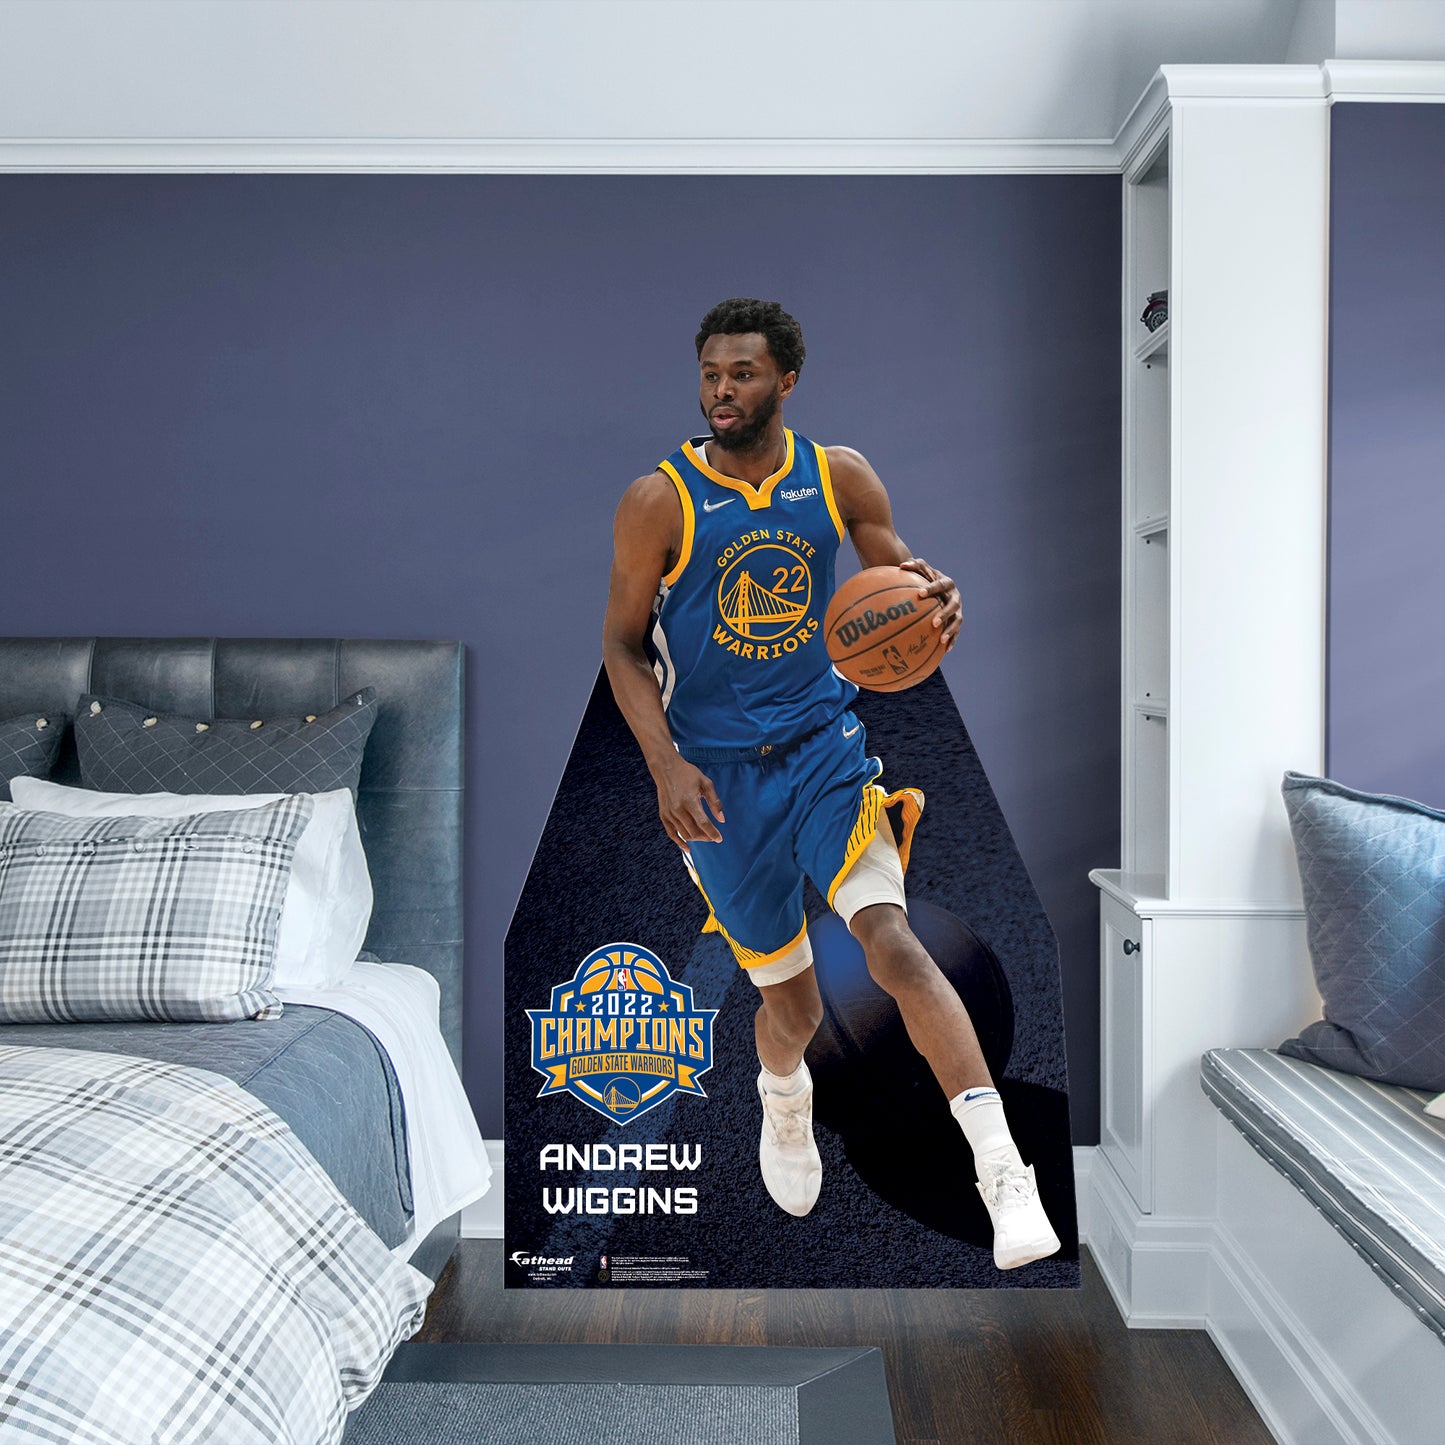 Golden State Warriors: Andrew Wiggins 2022 Champions  Life-Size   Foam Core Cutout  - Officially Licensed NBA    Stand Out